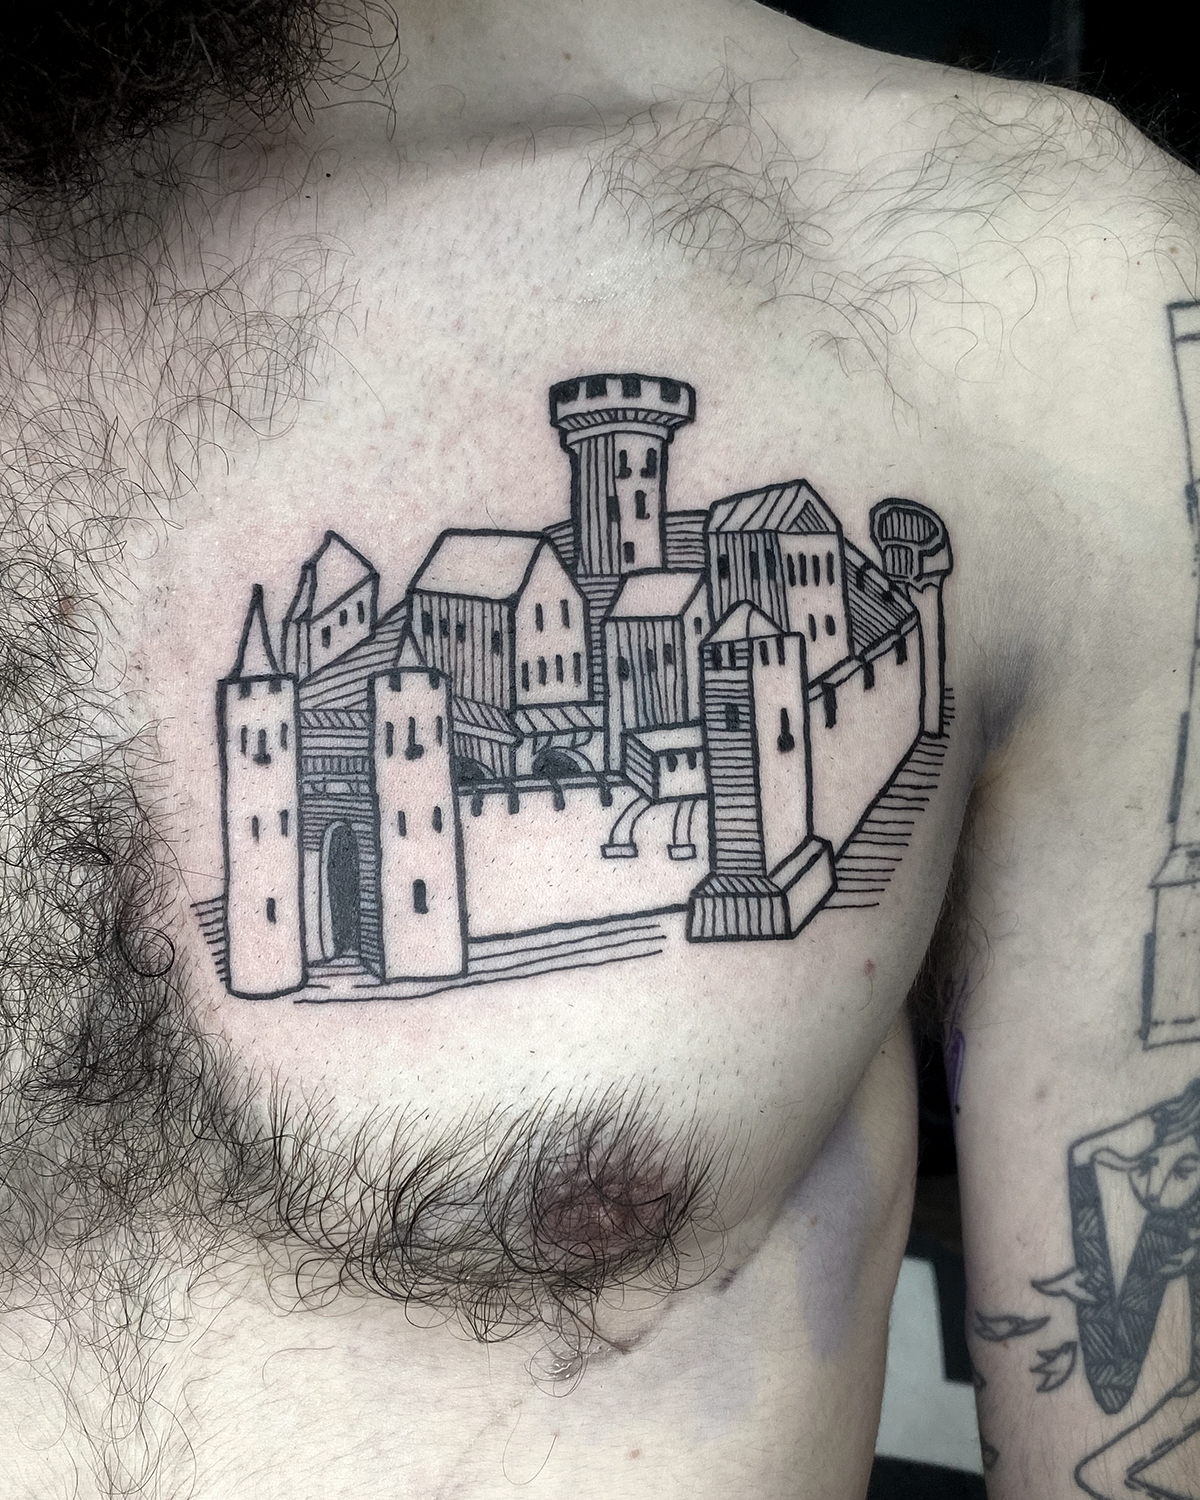 10 Best Castle Tattoo Ideas Youll Have To See To Believe   Daily Hind  News